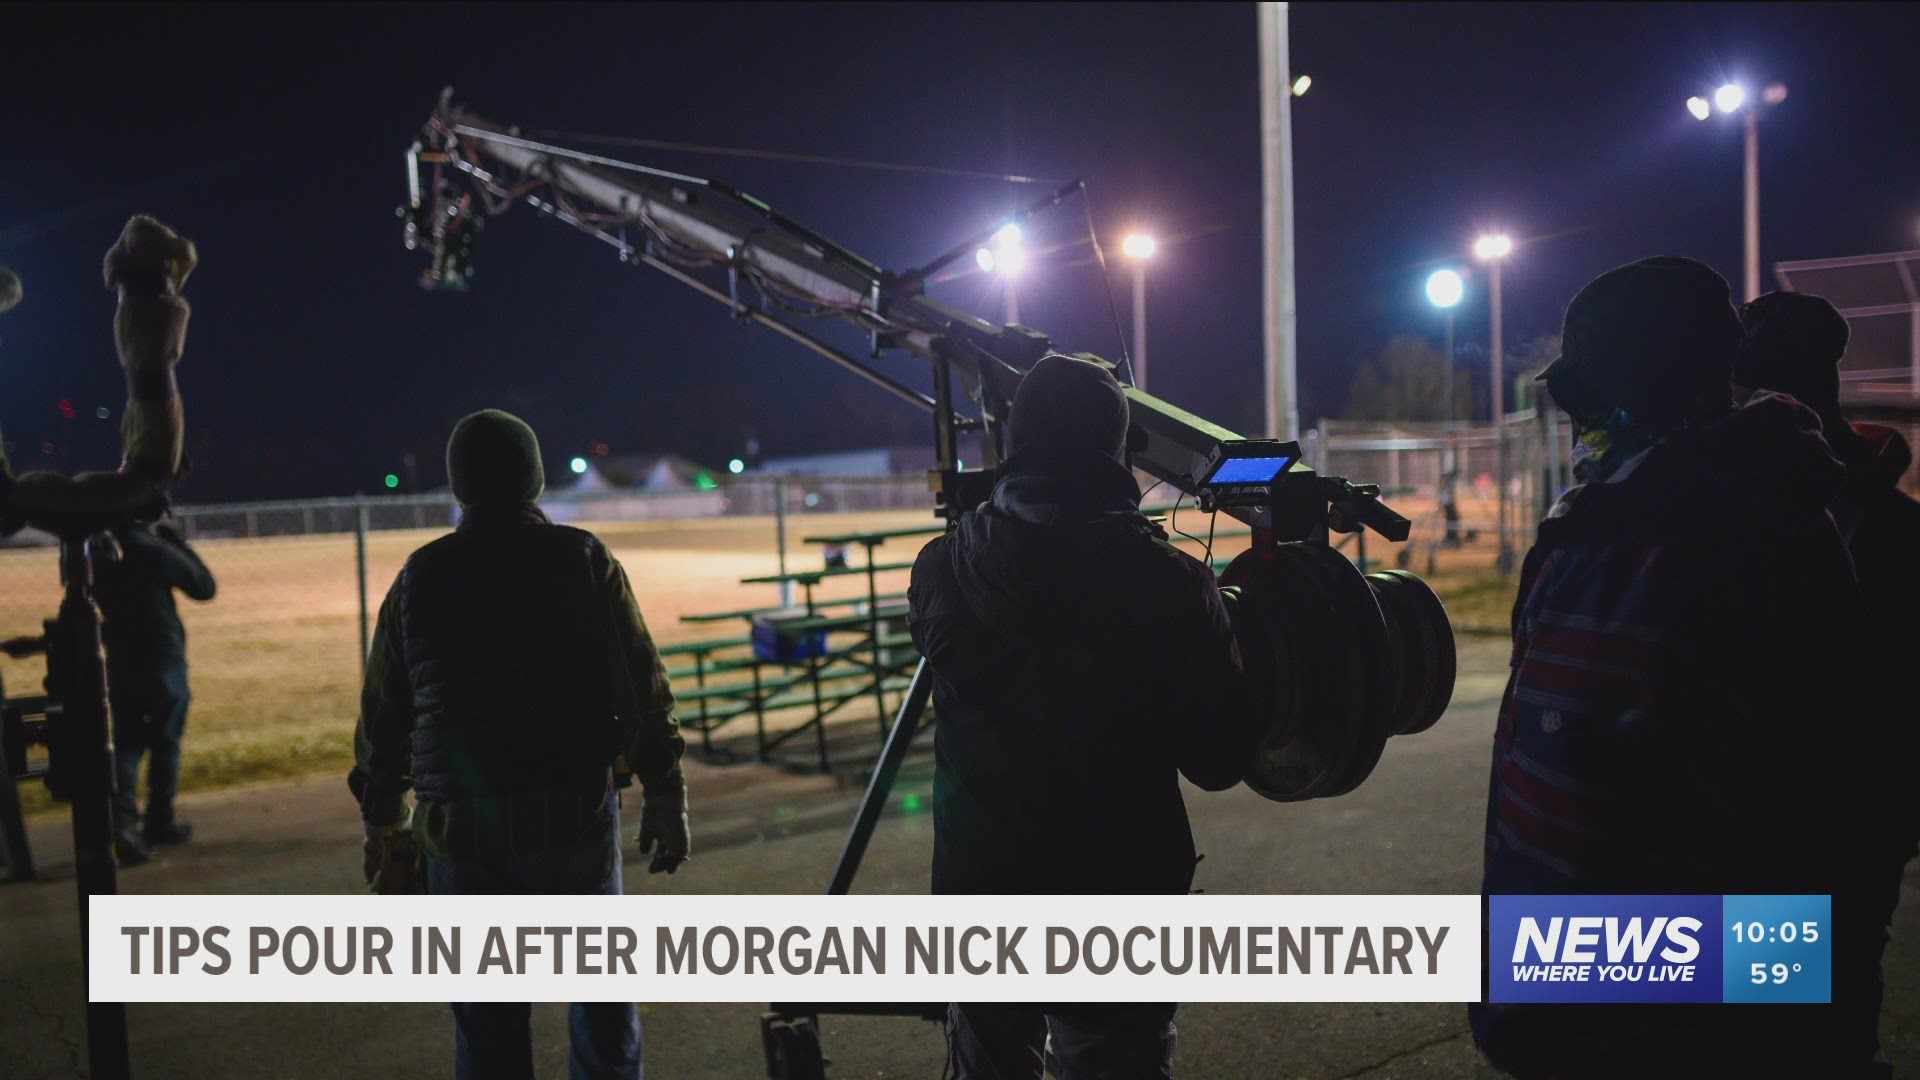 Morgan's mother Colleen Nick, FBI agents, as well as Alma police all, say tips regarding the 25-year-old case have been flowing in since the documentary aired.